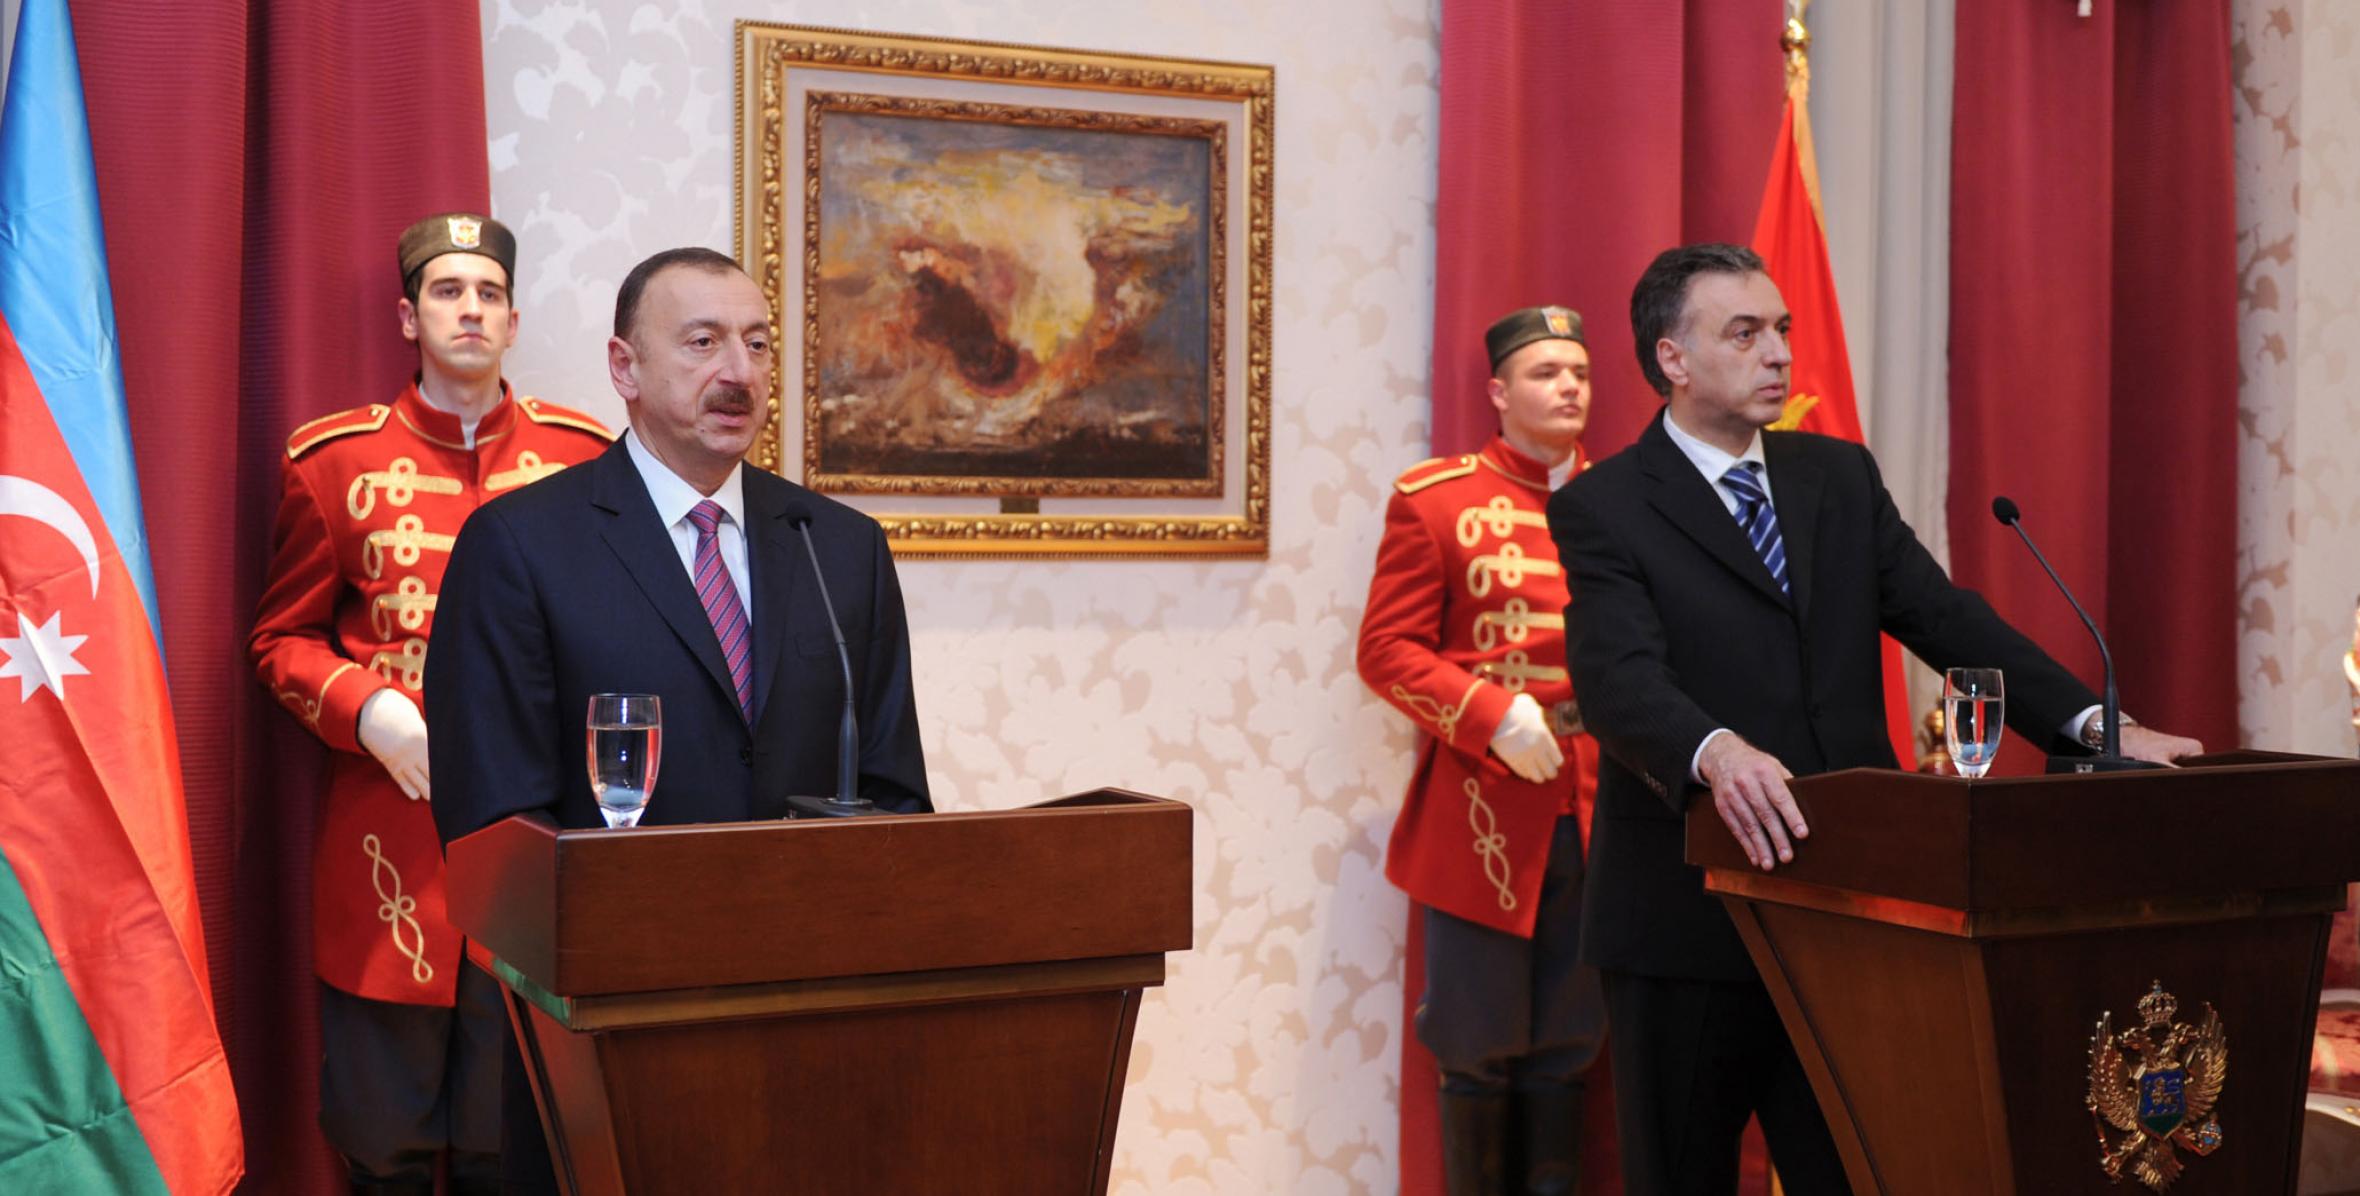 Presidents of Azerbaijan and Montenegro made statements for the press